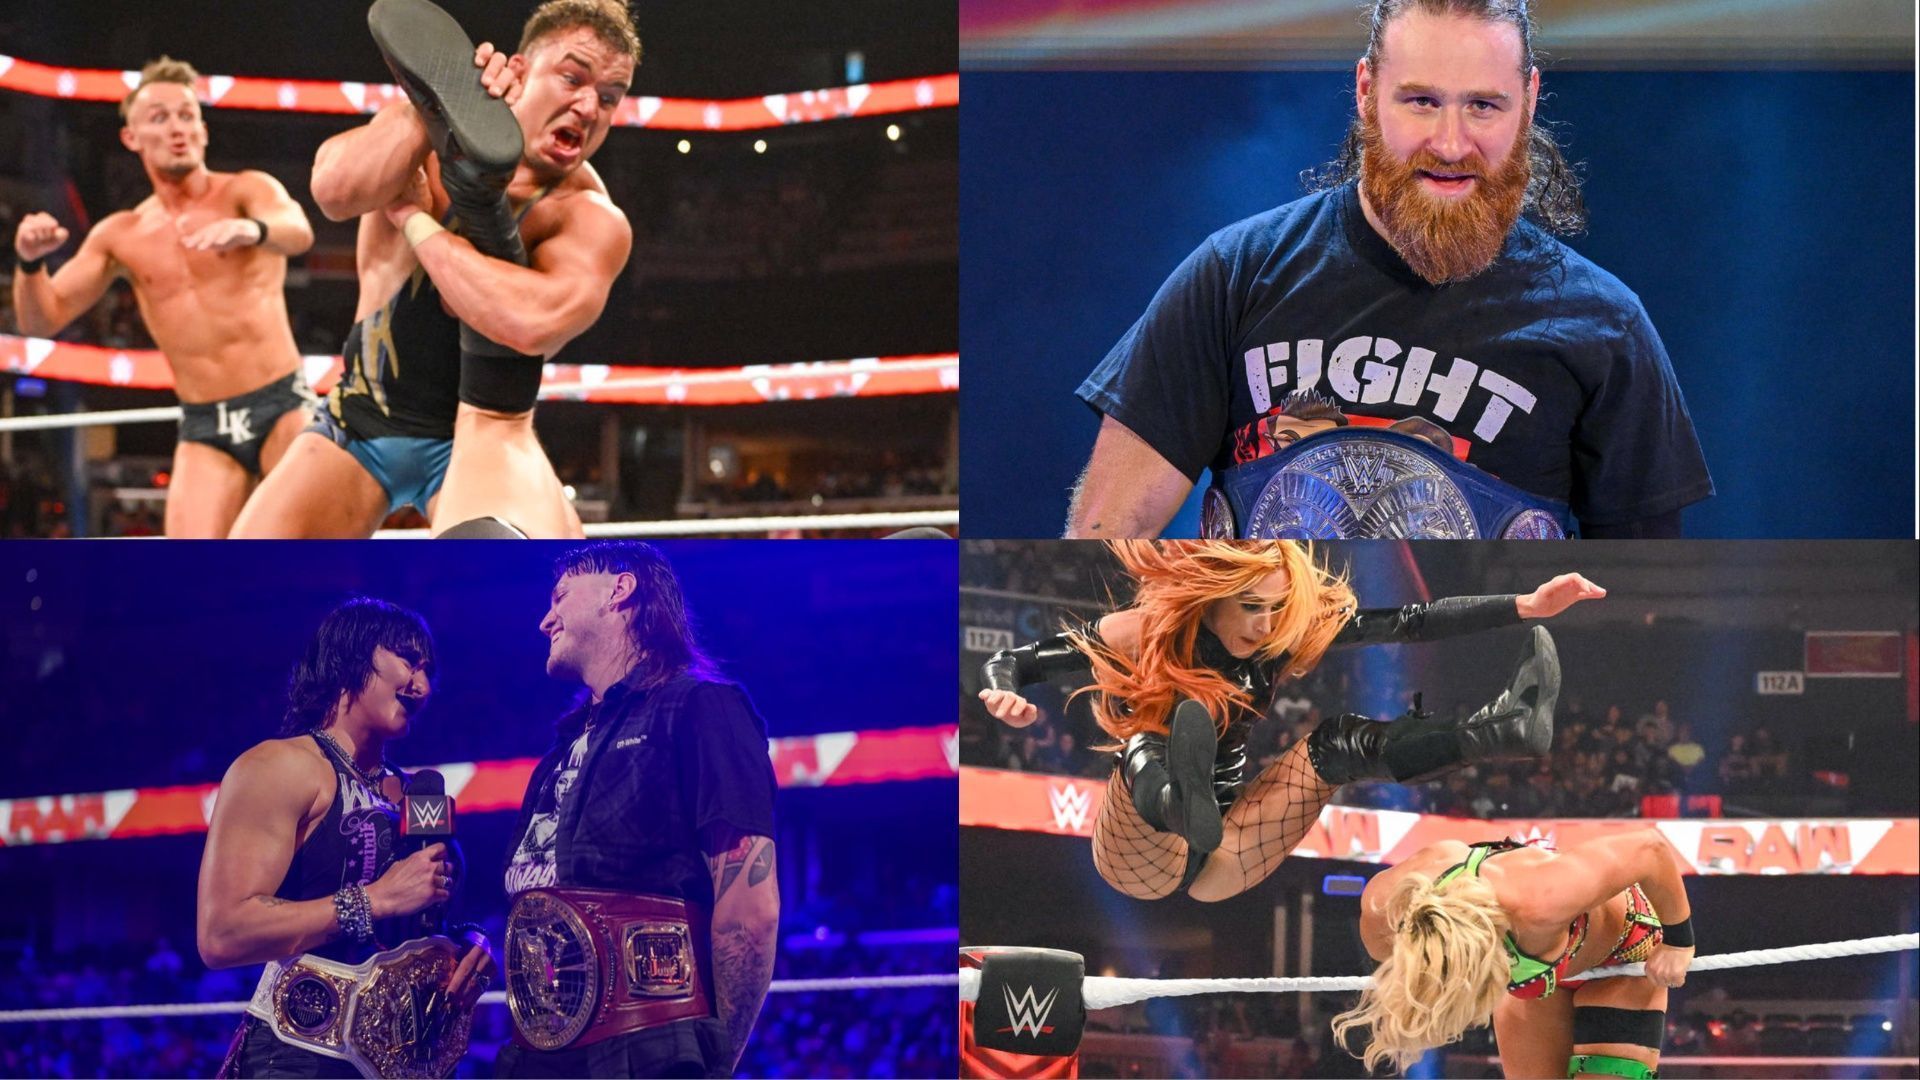 WWE RAW was action-packed from start to finish.